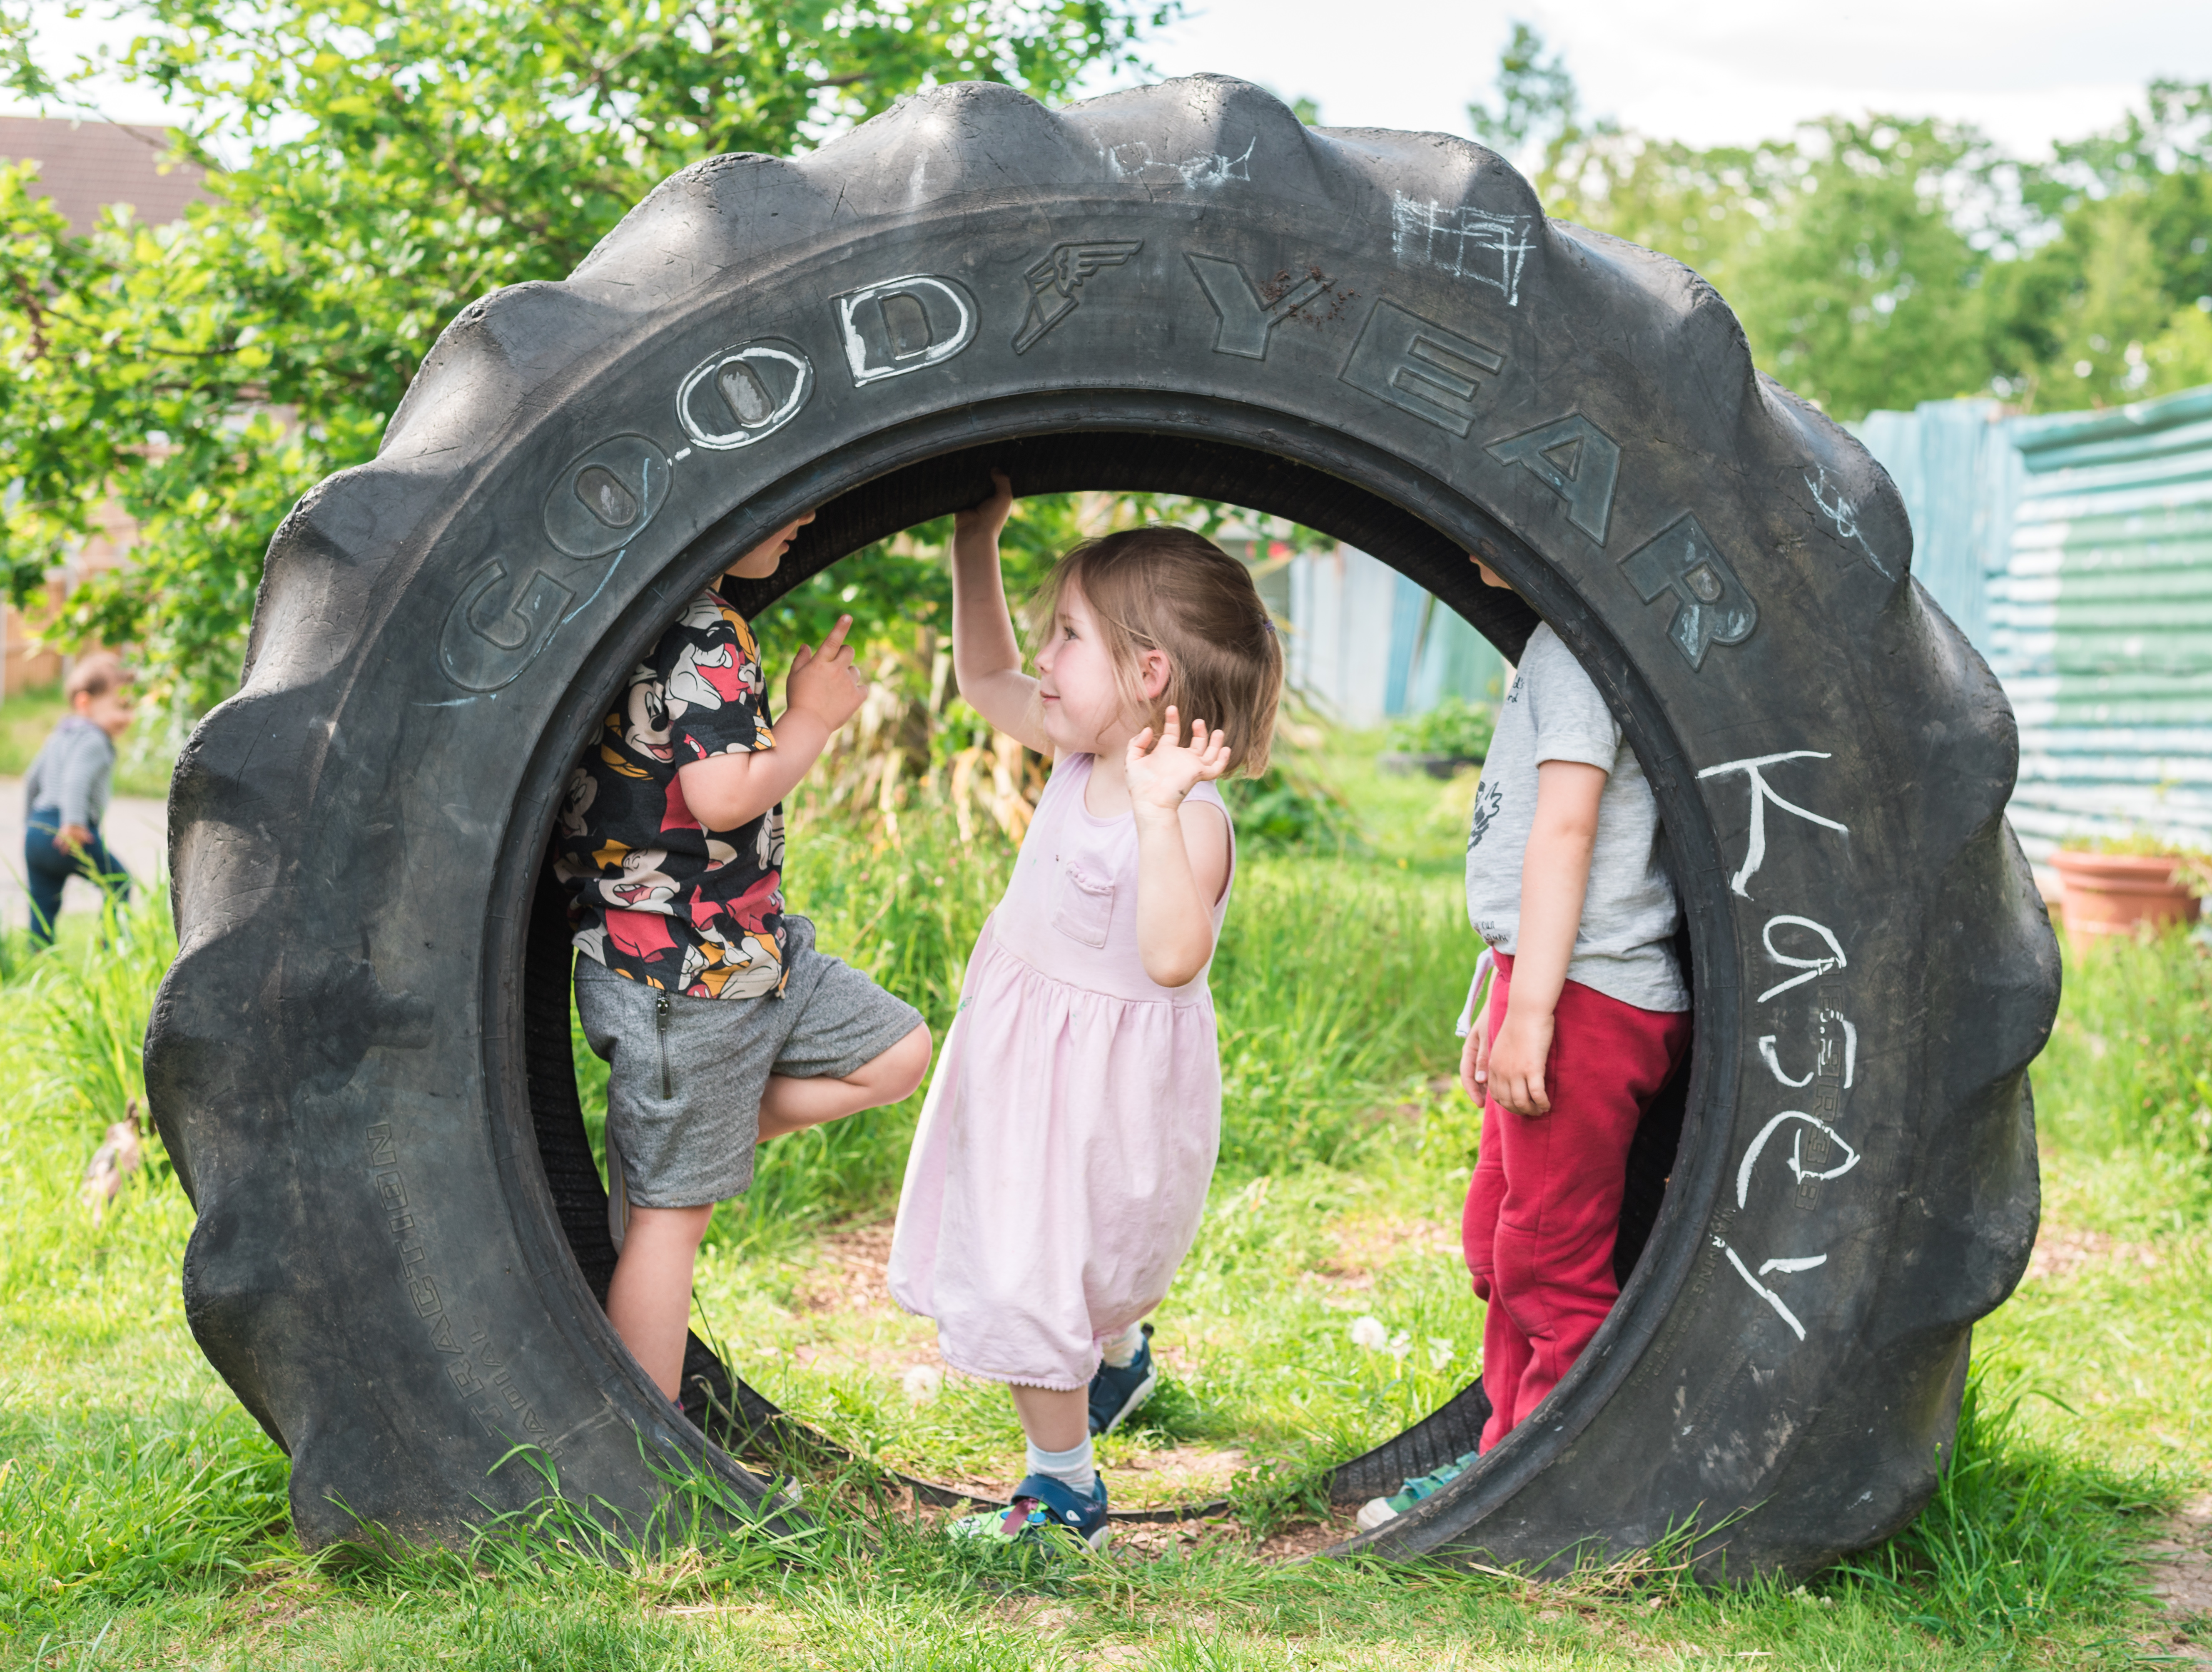 a little girl plays inside a tractor wheel in a playground